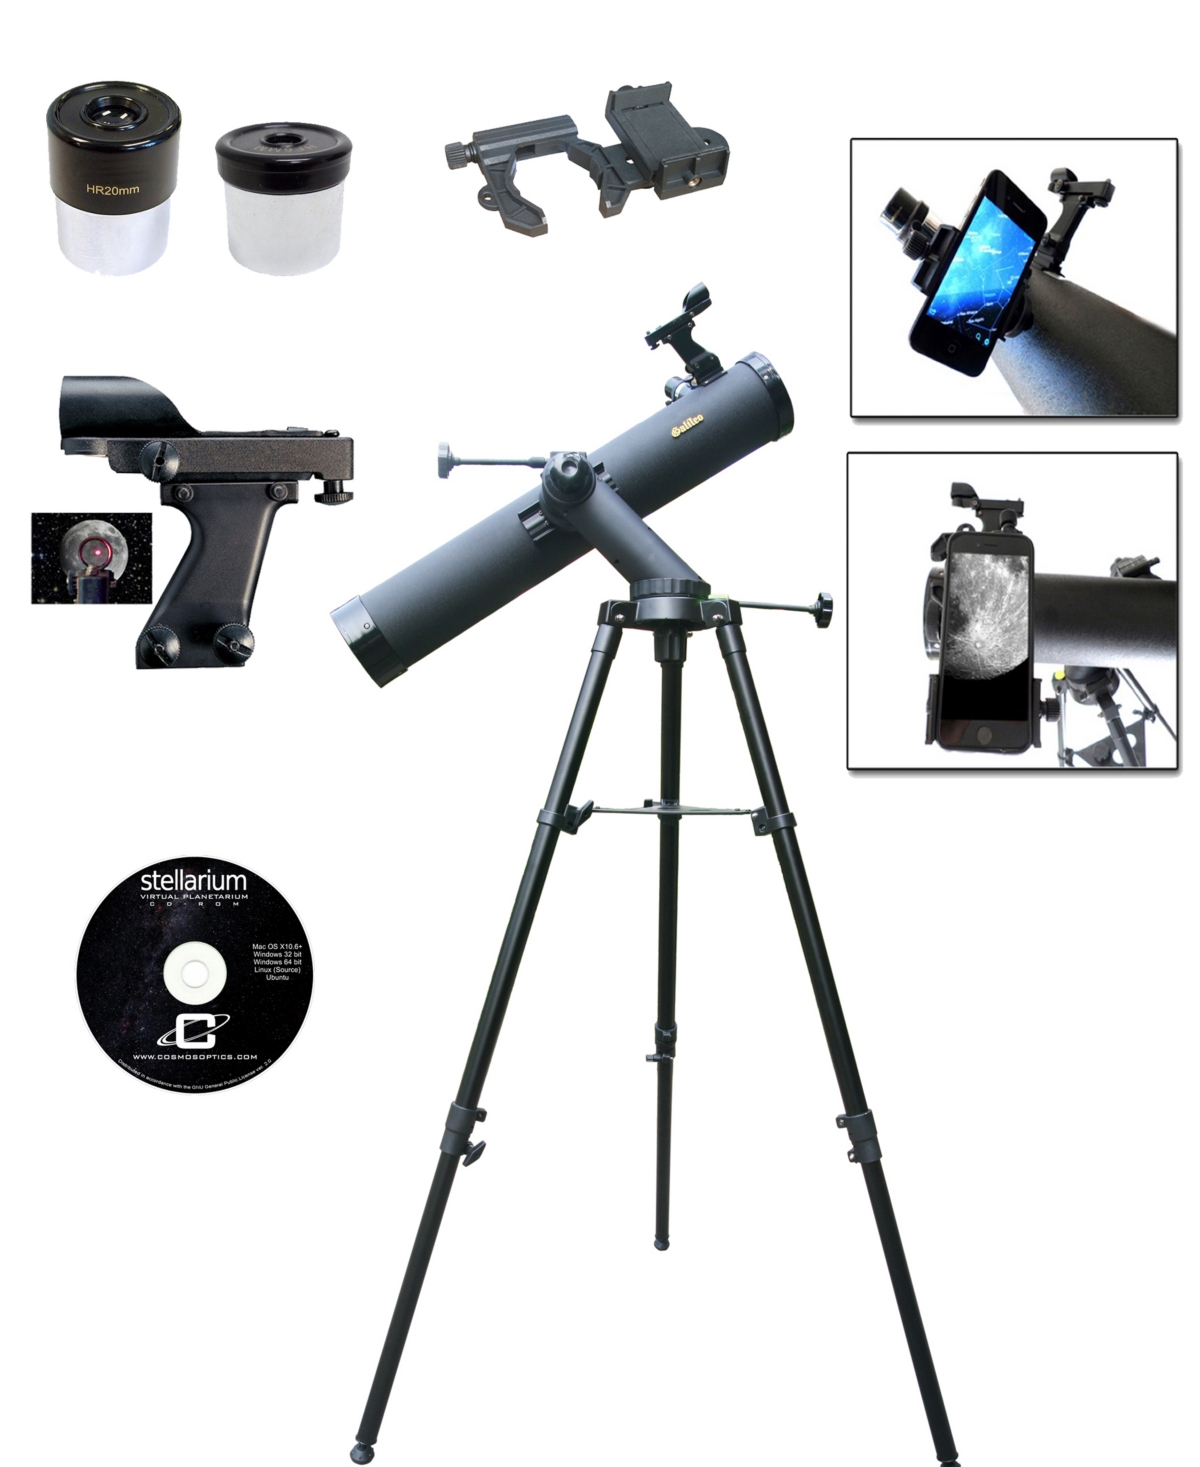 Cassini 800mm X 90mm Astronomical Tracker Mount Telescope And Smartphone Adapter In Black